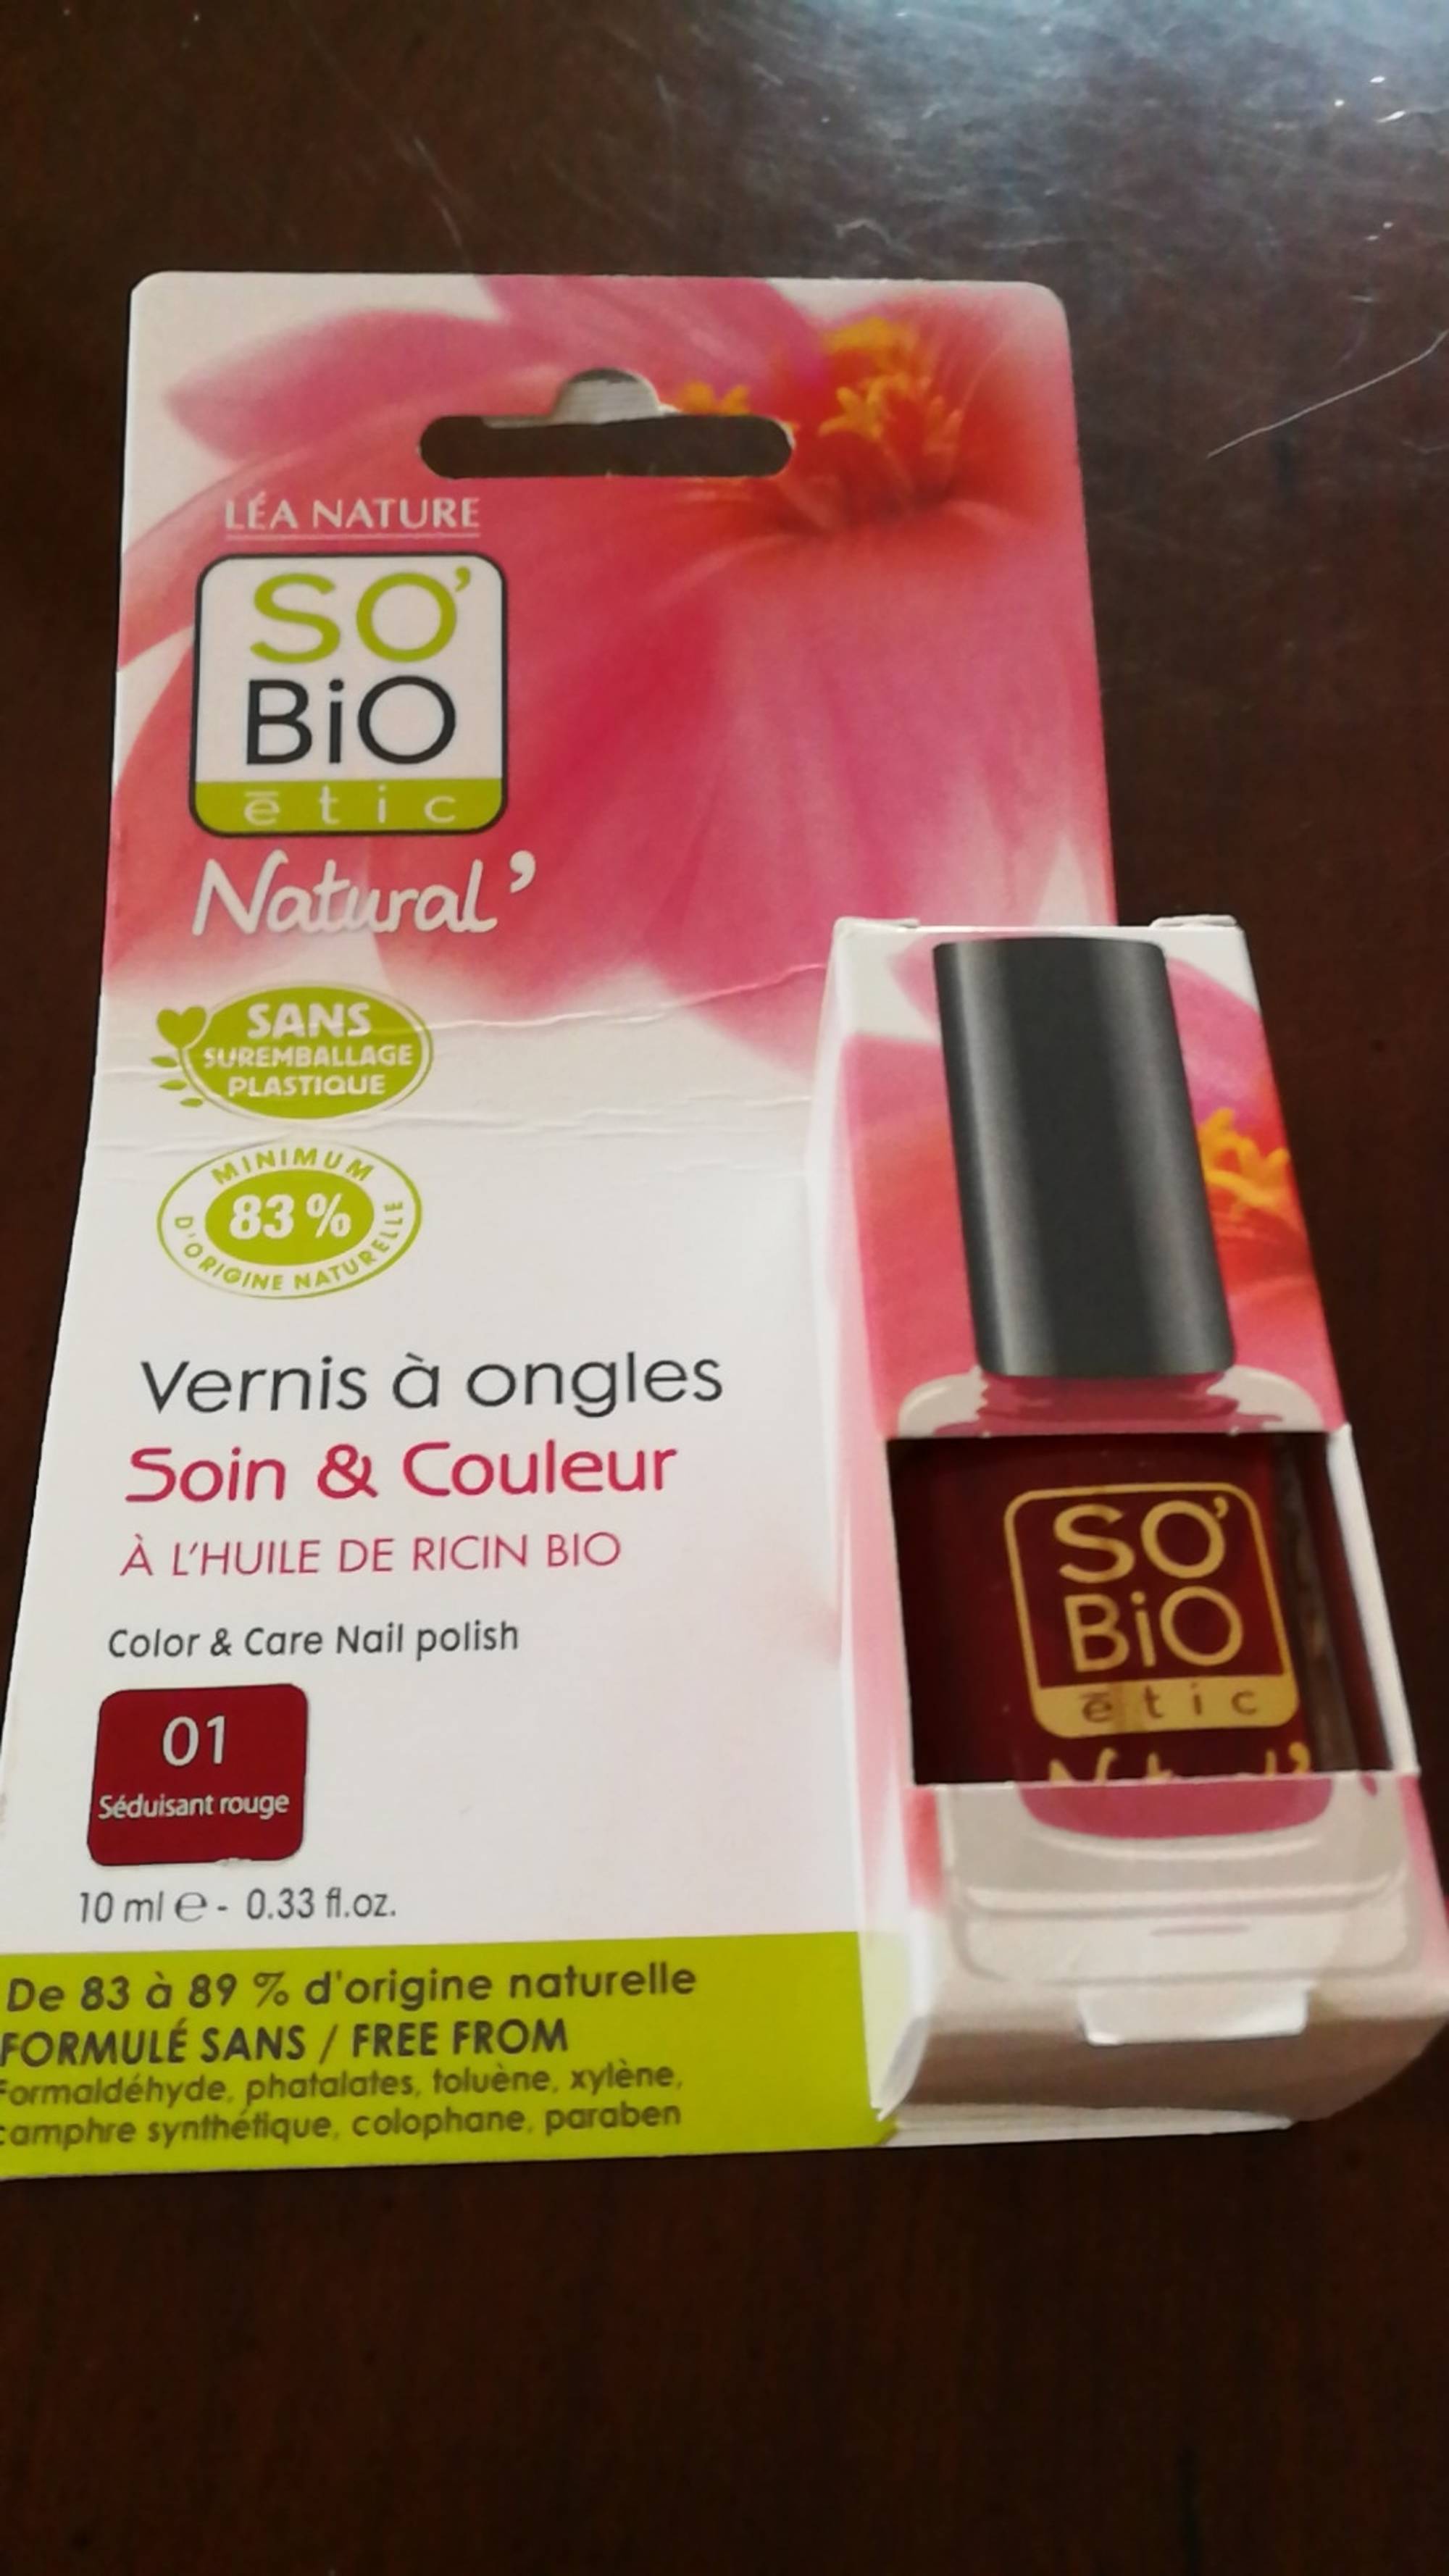 Vernis a ongles 07 Rouge Velours So Bio etic 10ml